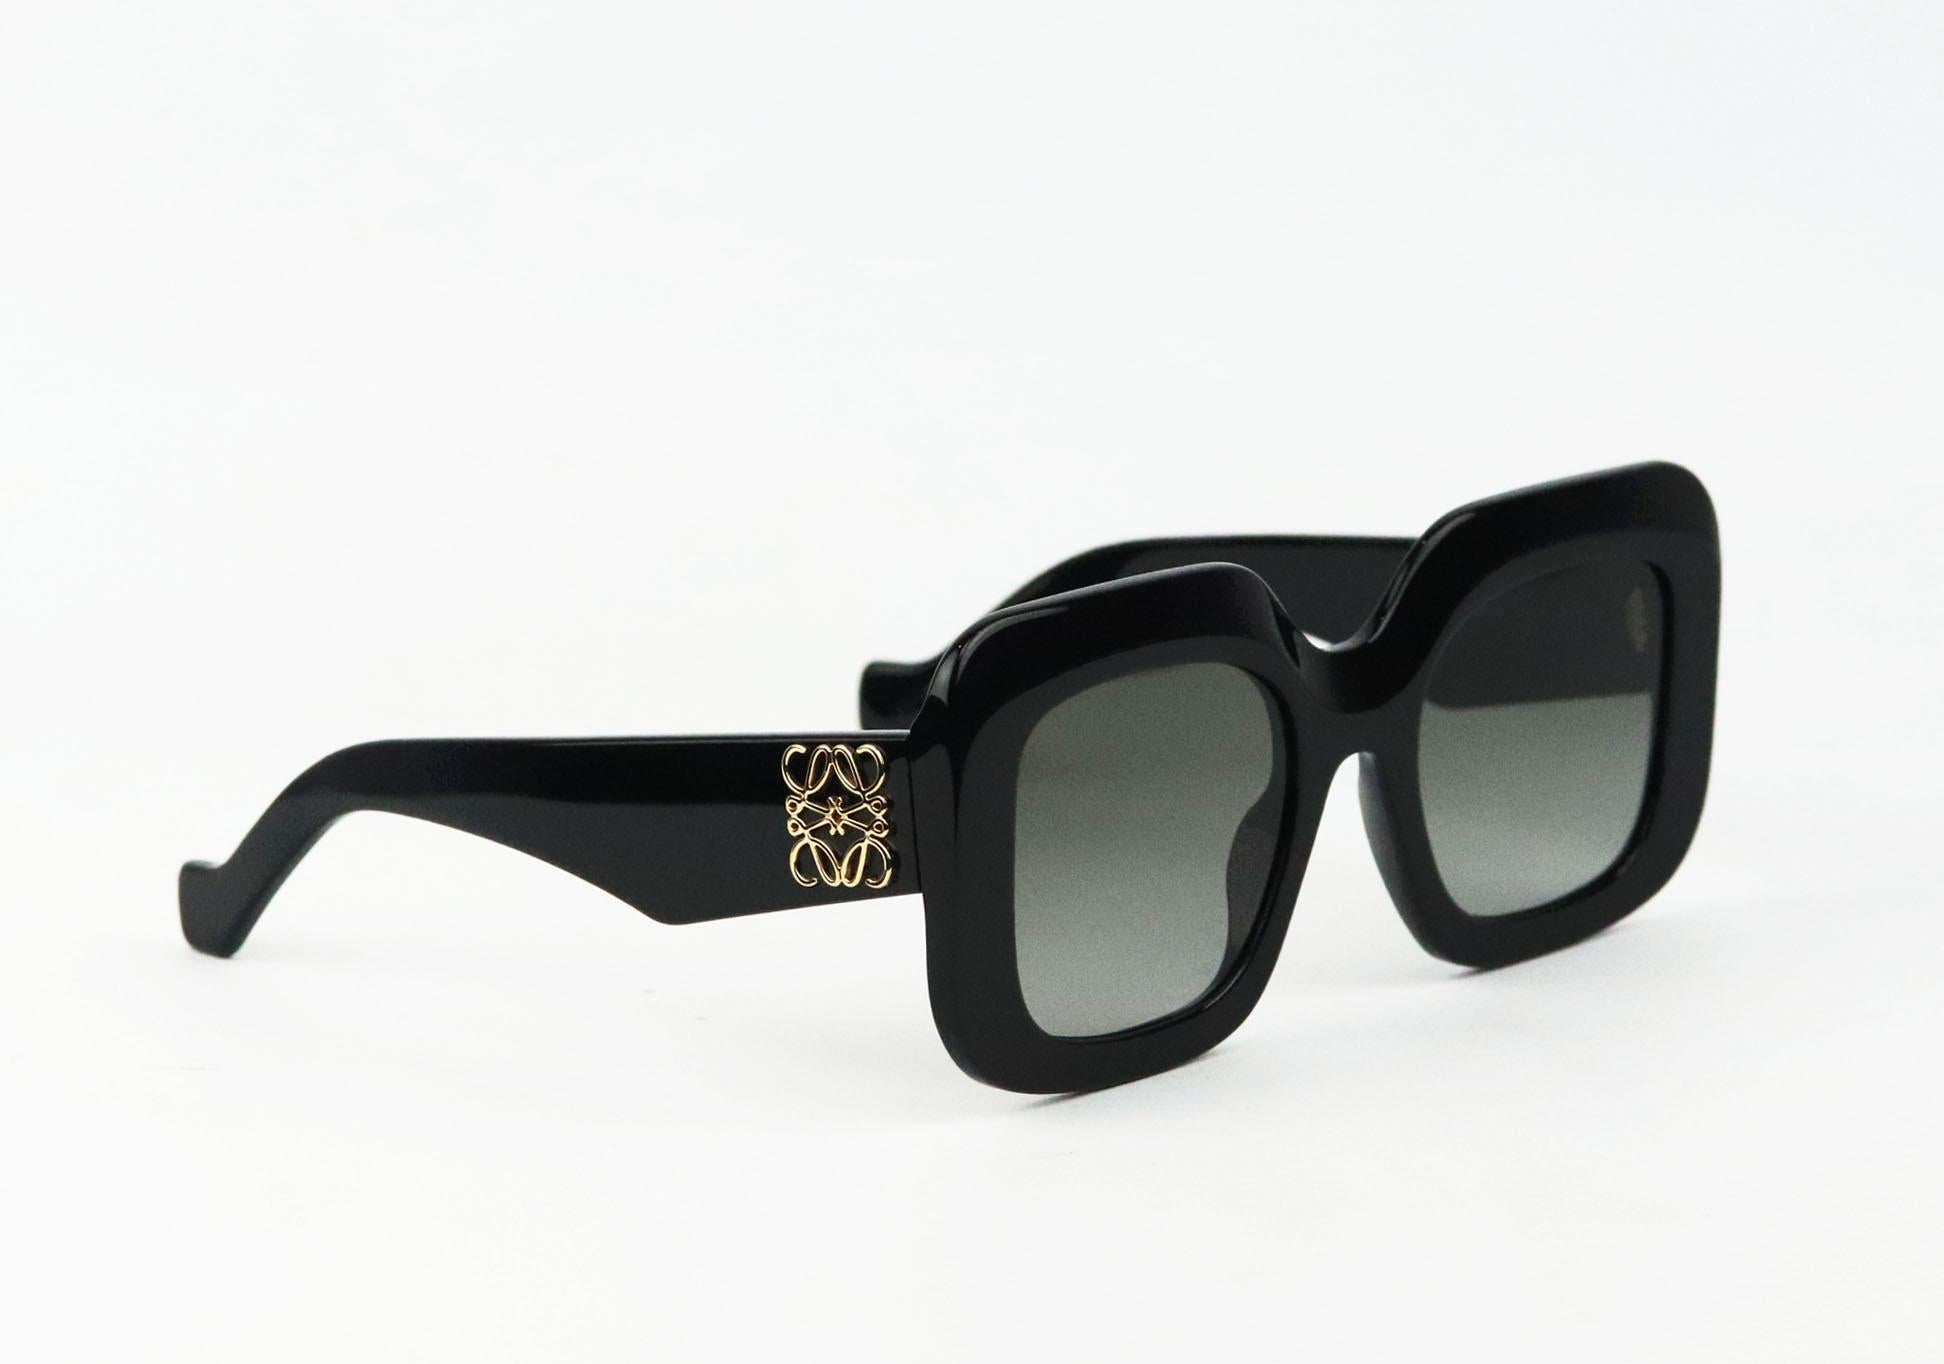 Loewe's accessories are as recognizable as its cult bags - these sunglasses are detailed with the brand's gold 'Anagram' hardware at the temples, they've been made in Italy from glossy black acetate with oversized square frames that'll suit softer